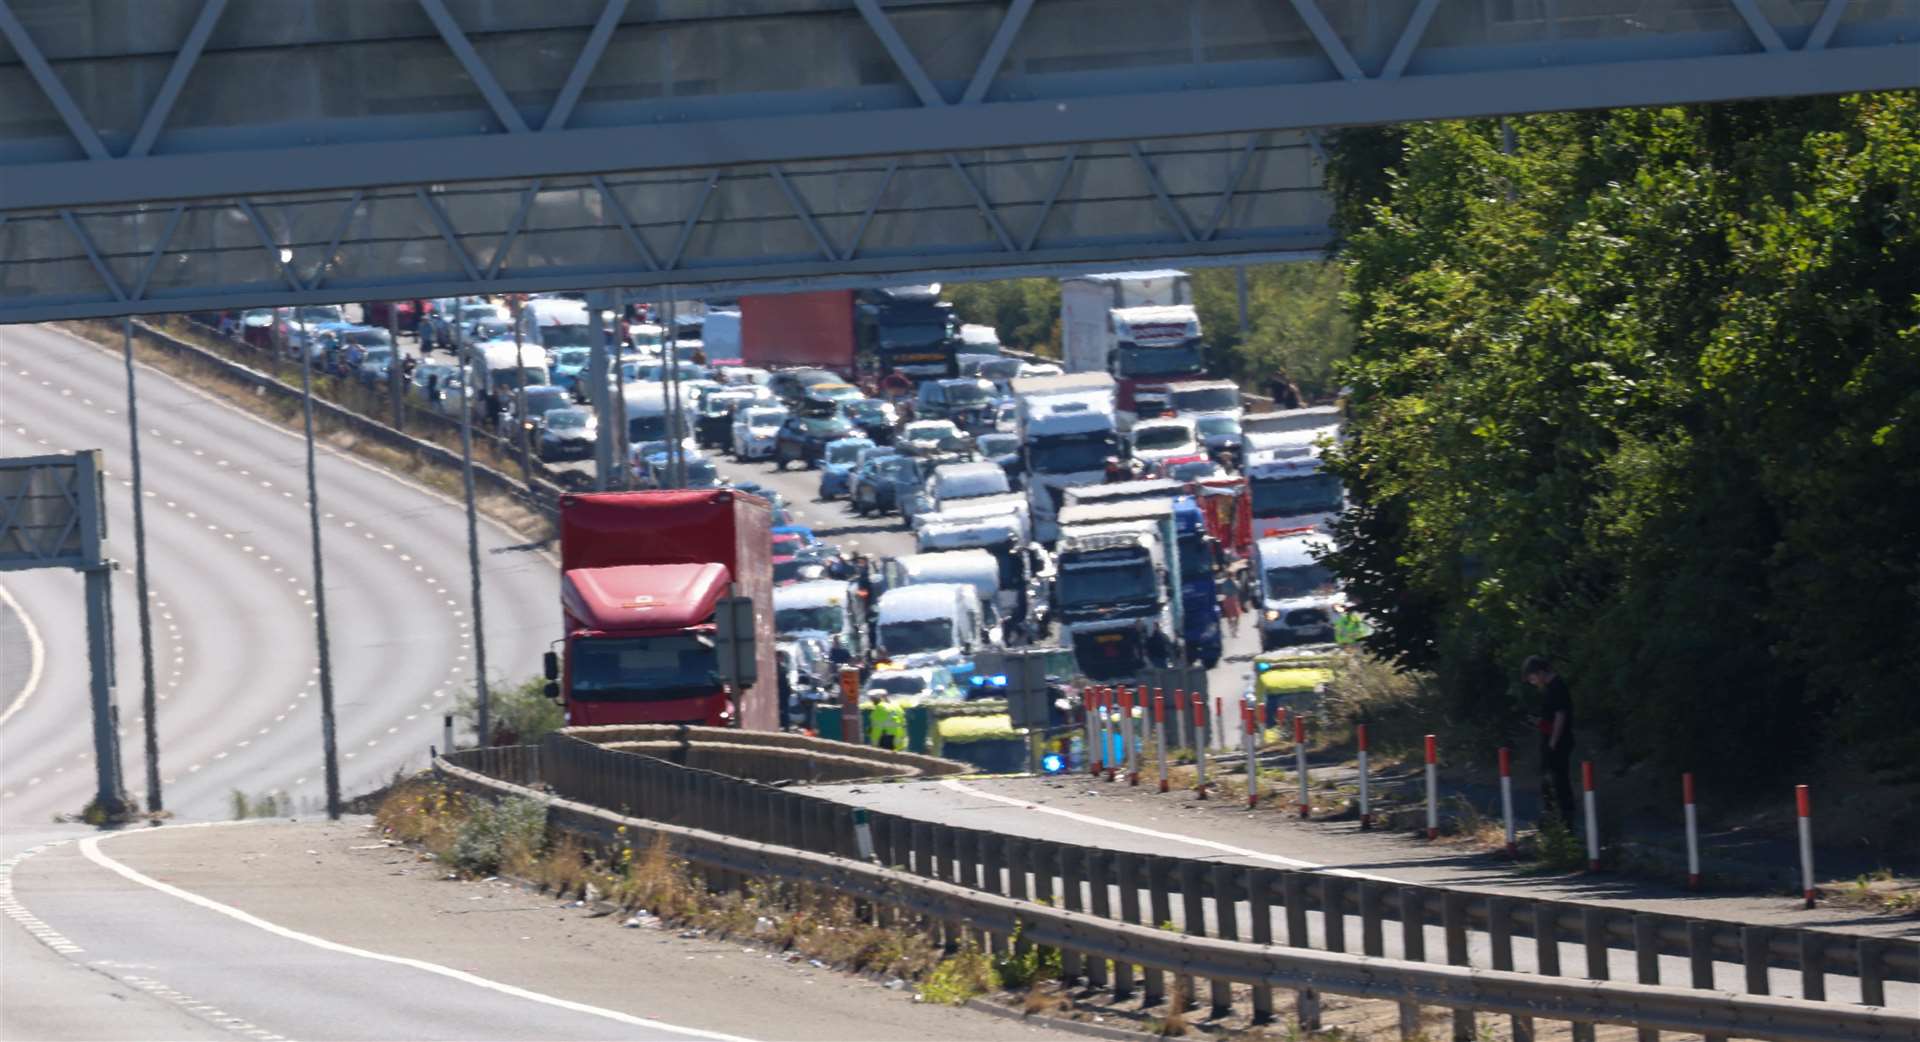 Traffic held on the A2 after a serious crash. Images: UKNIP